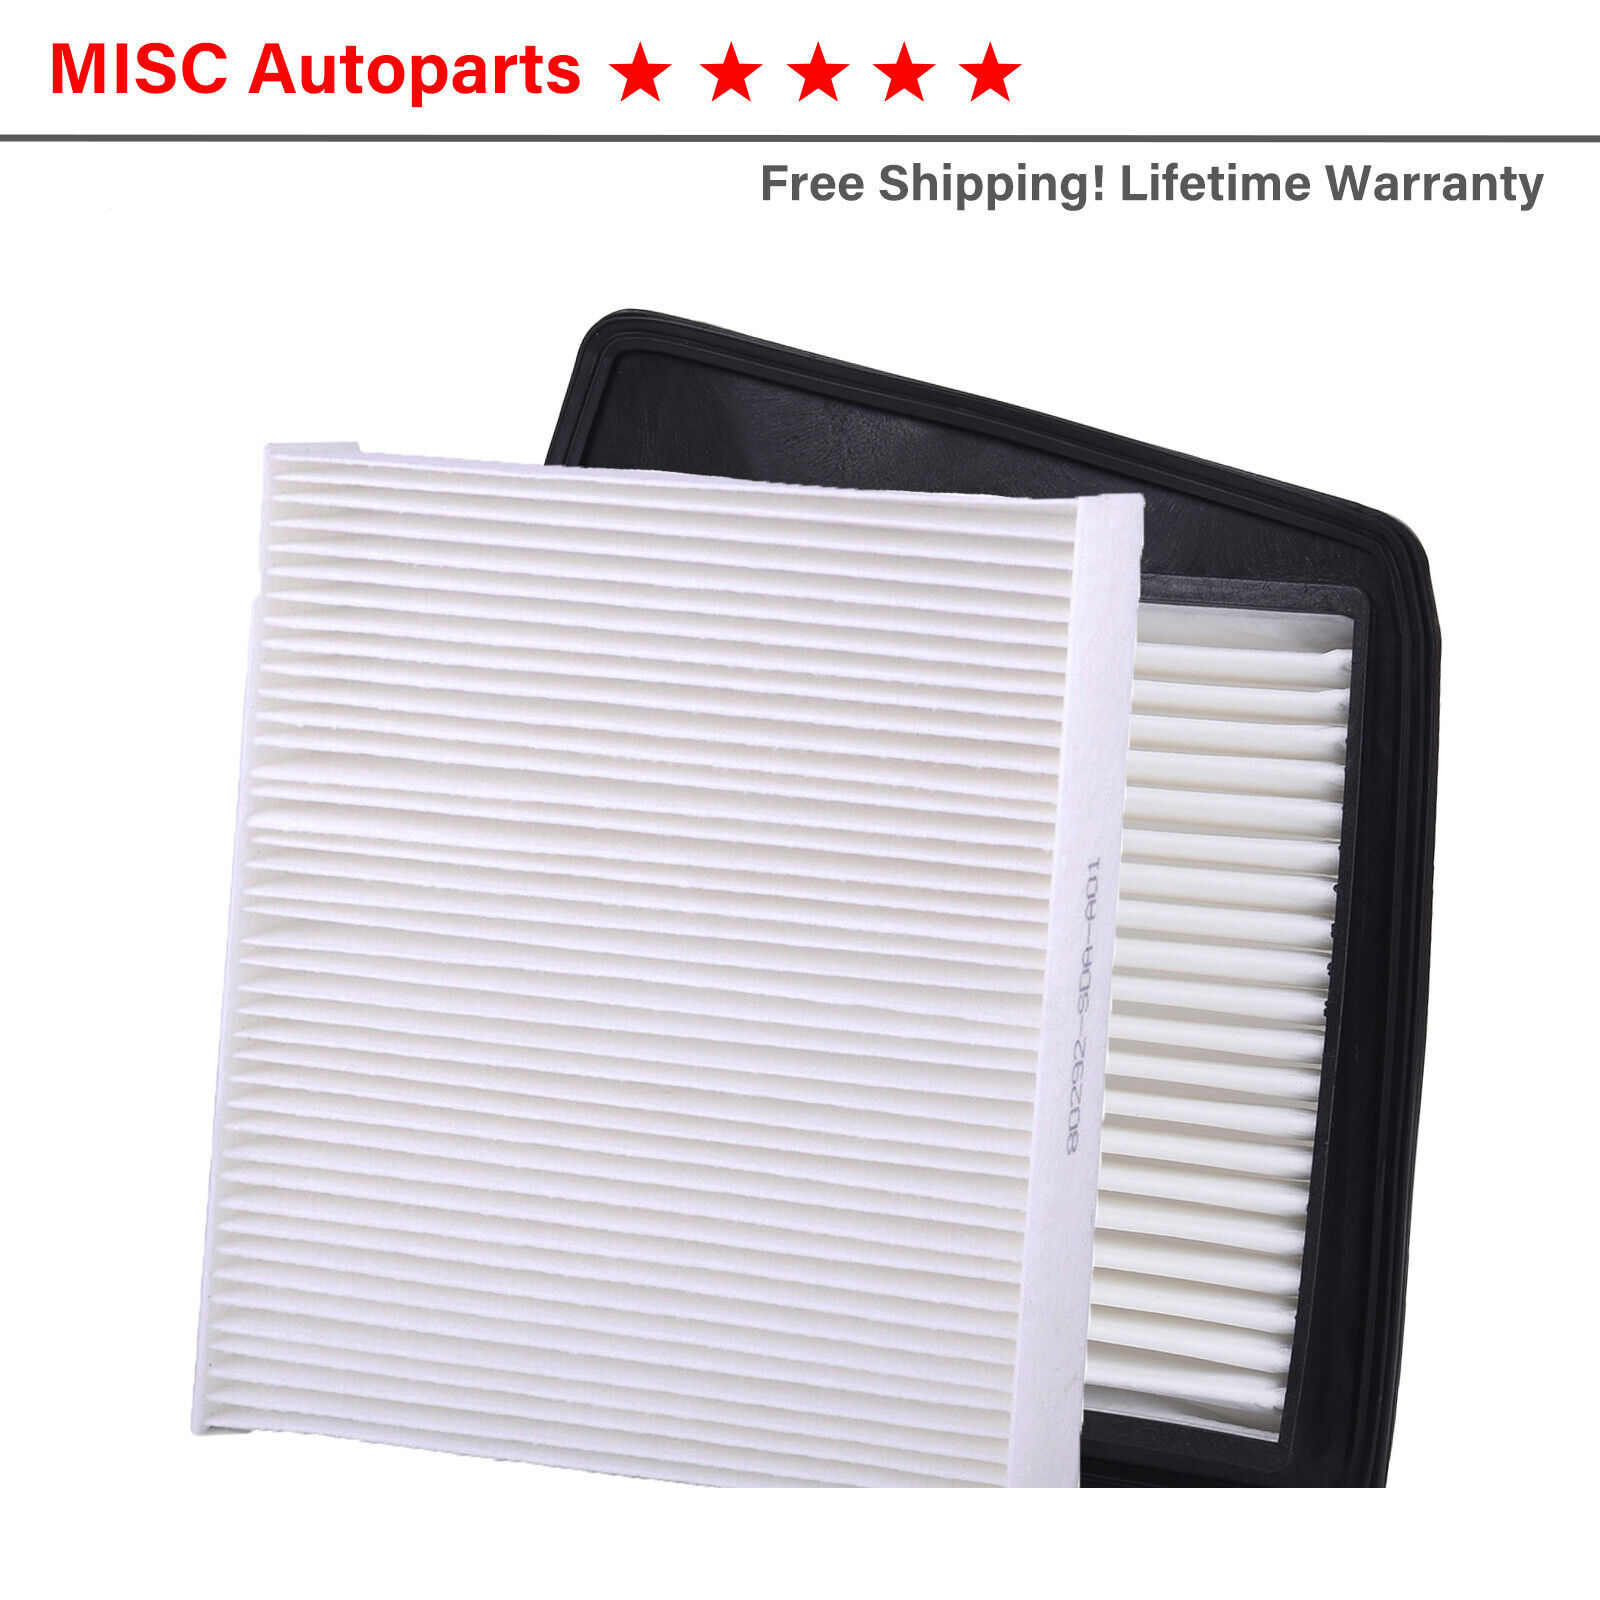 Engine & Cabin Air Filter For 09-14 Acura TSX 2.4L 17220-RL5-A00 80292-SDA-A01